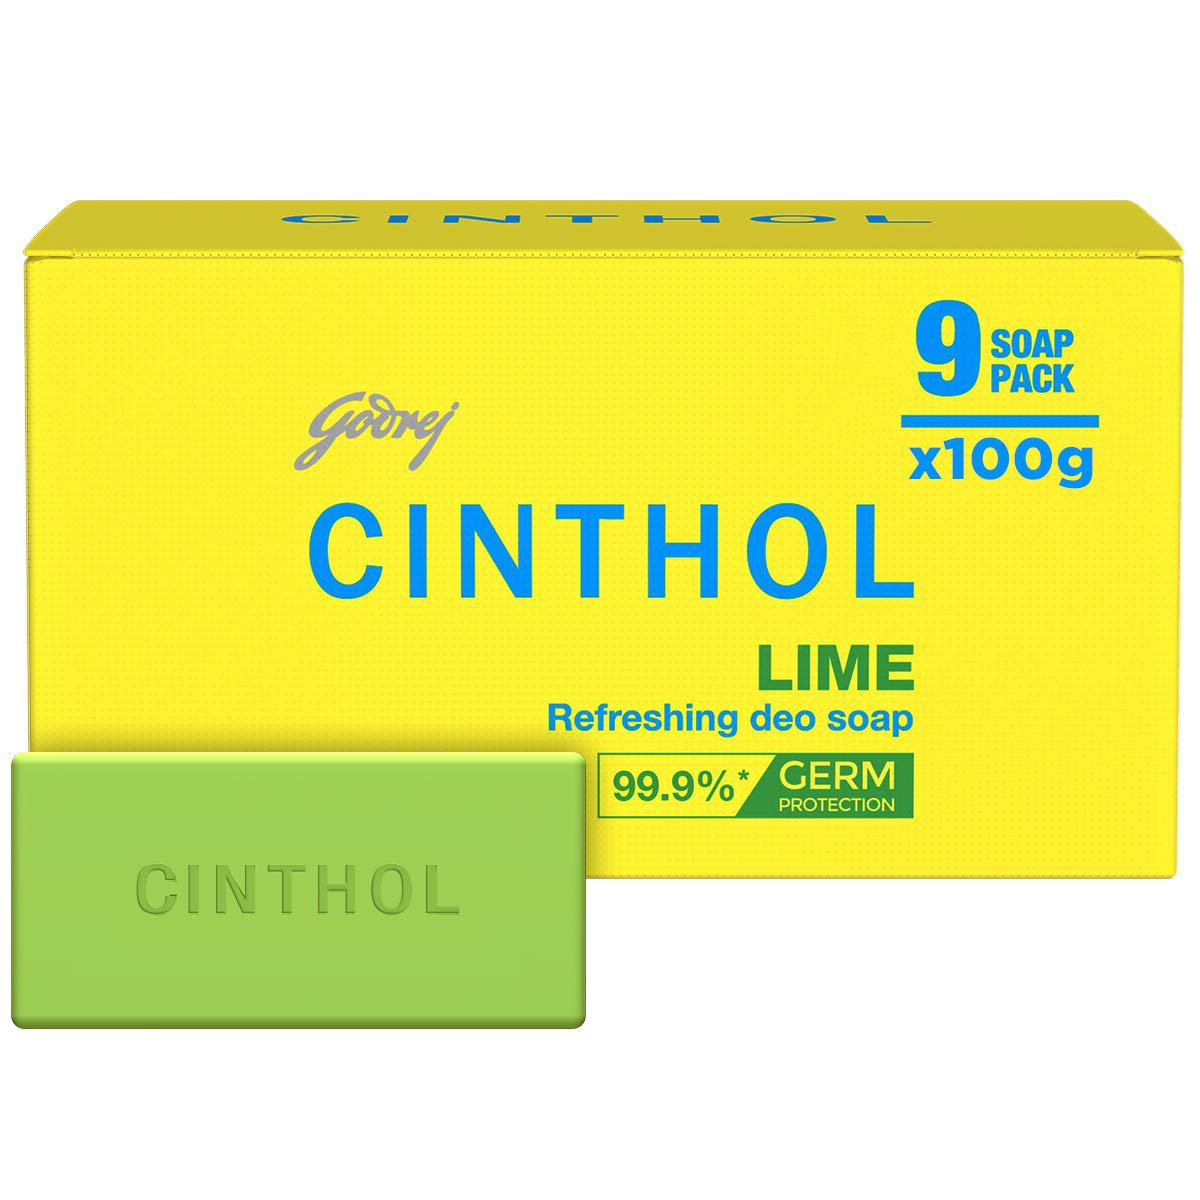 Cinthol Lime Bath Soap 99.9% Germ Protection, 100g (Pack of 9)